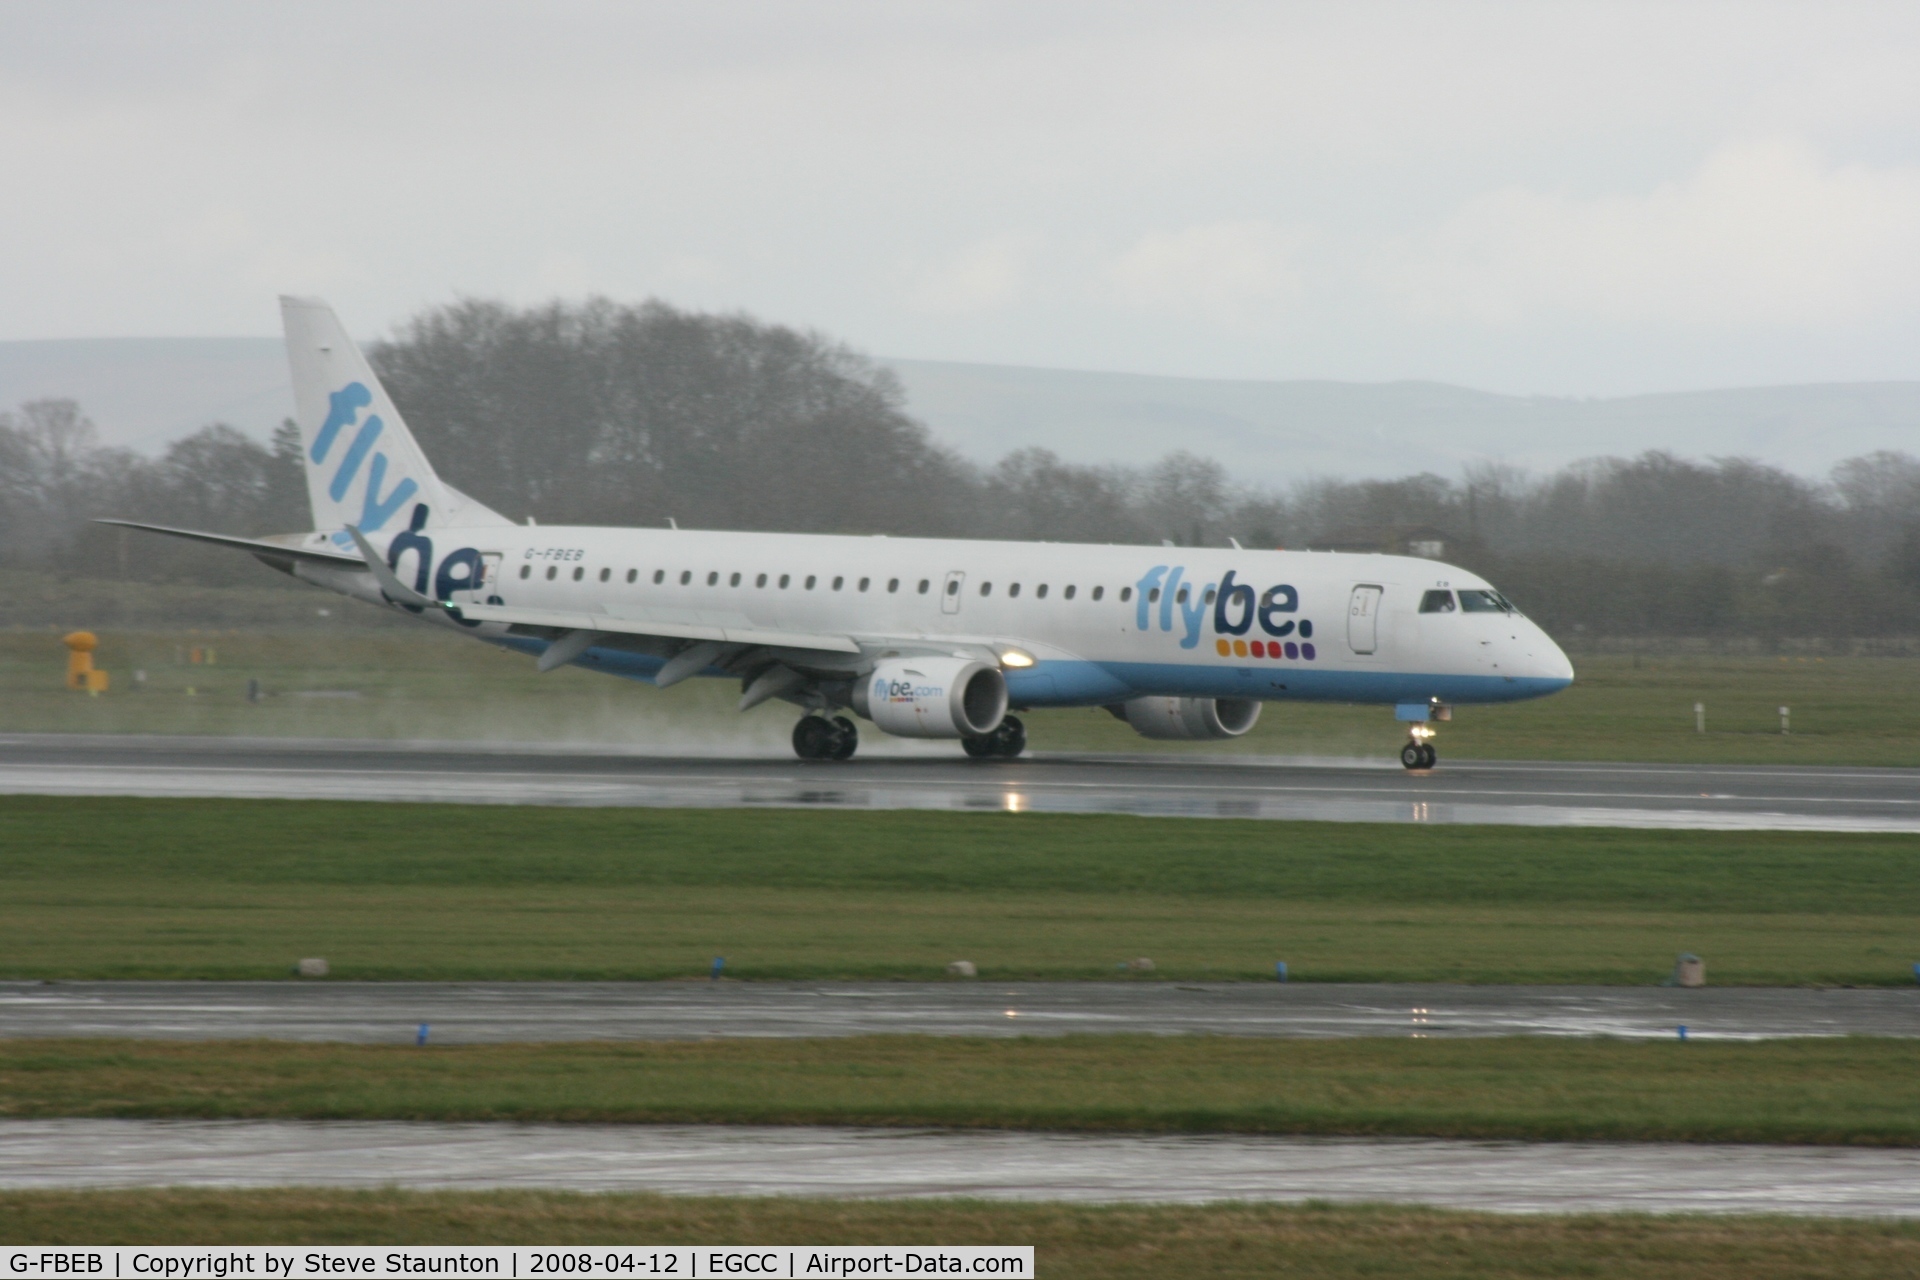 G-FBEB, 2006 Embraer 195LR (ERJ-190-200LR) C/N 19000057, Taken at Manchester Airport on a typical showery April day